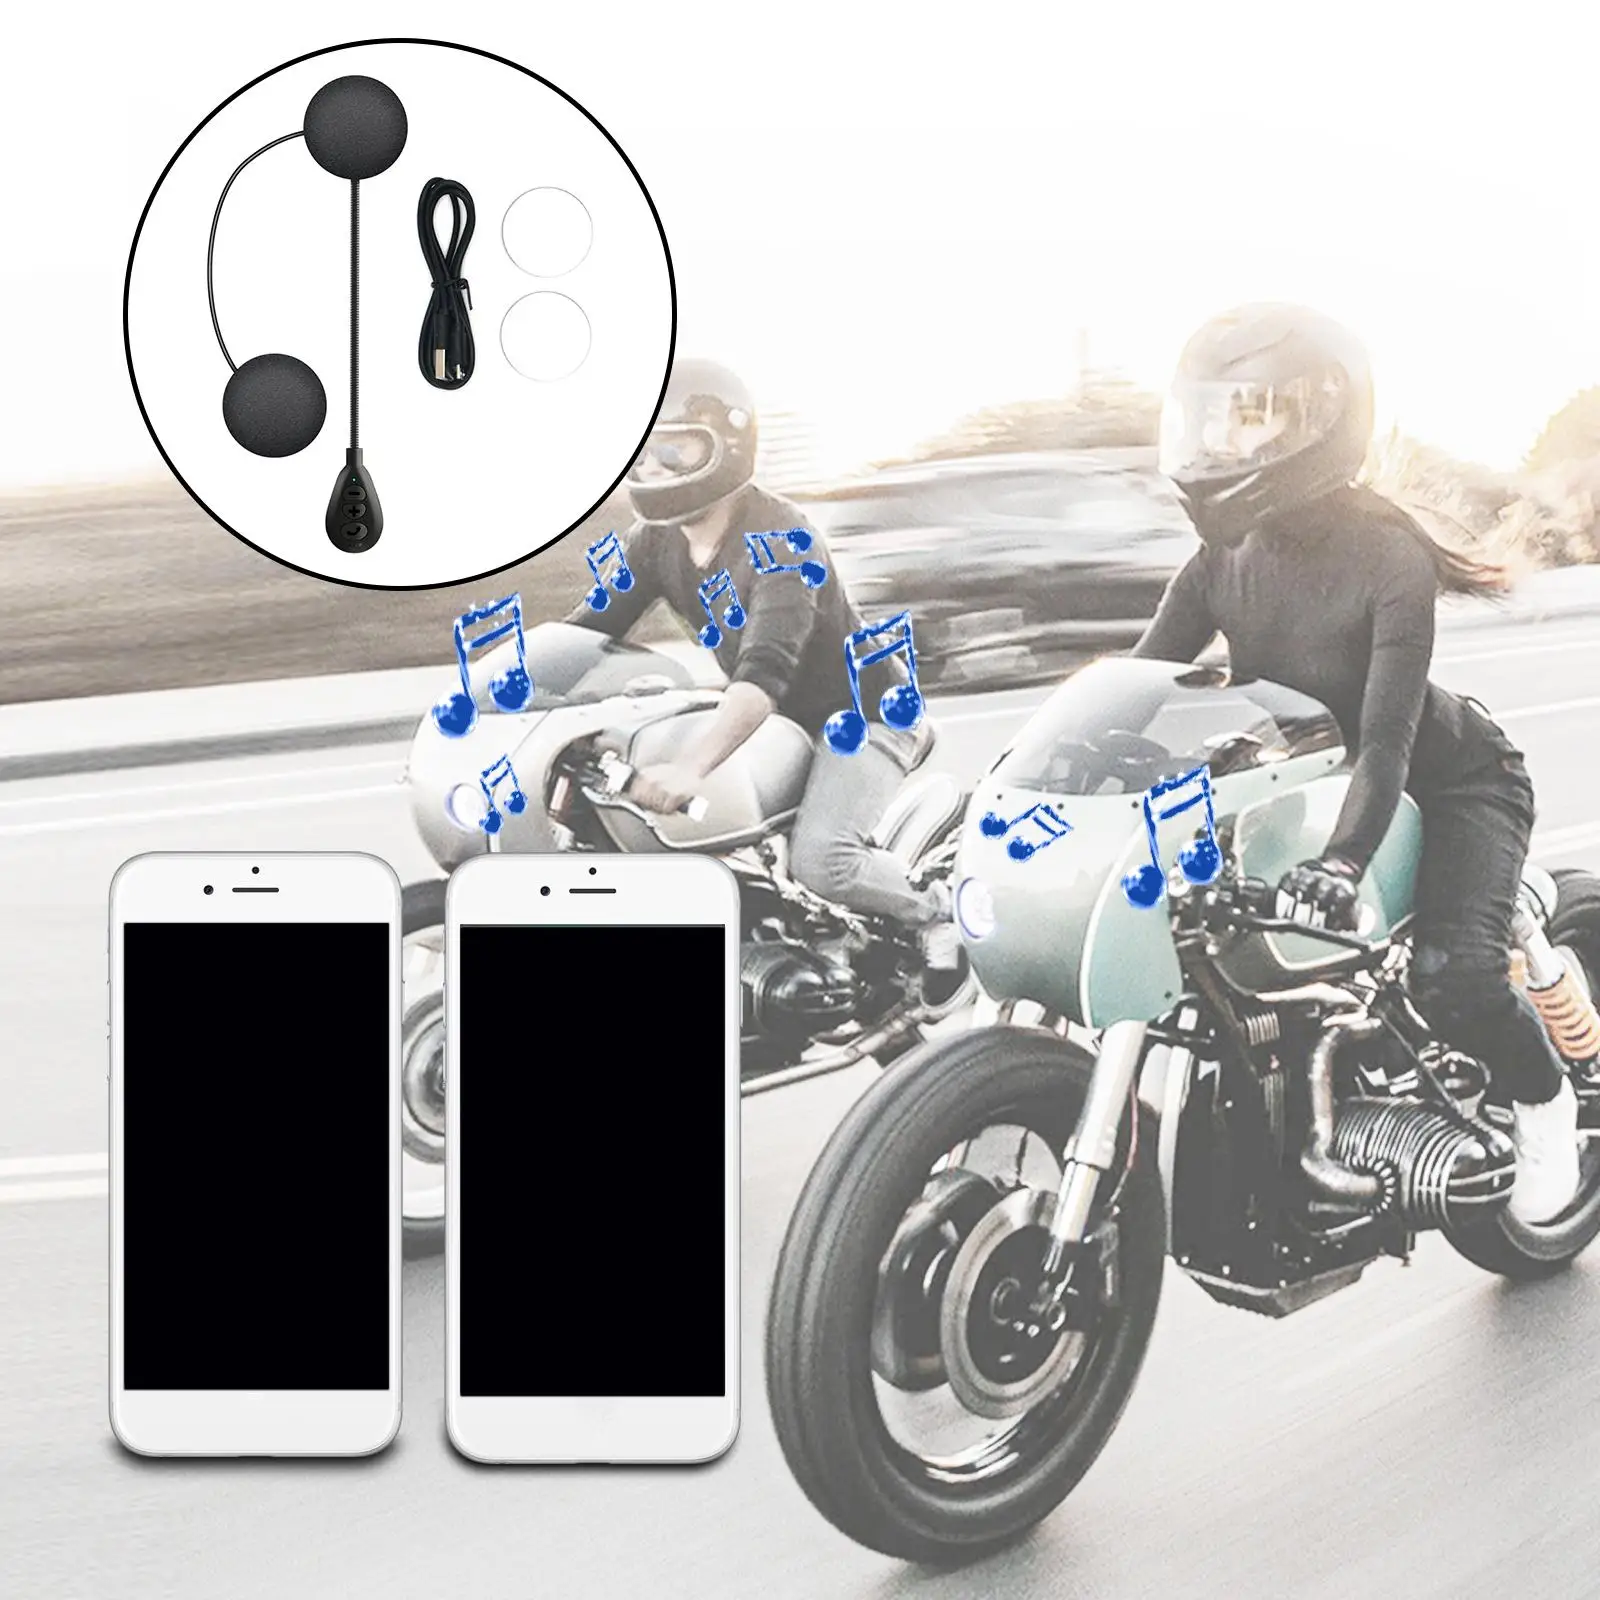 Motorcycle Bluetooth Helmet Headset Auto Answer Incoming Calls Wireless Noise Cancelling 5.0 Handsfree Headphone for Riding